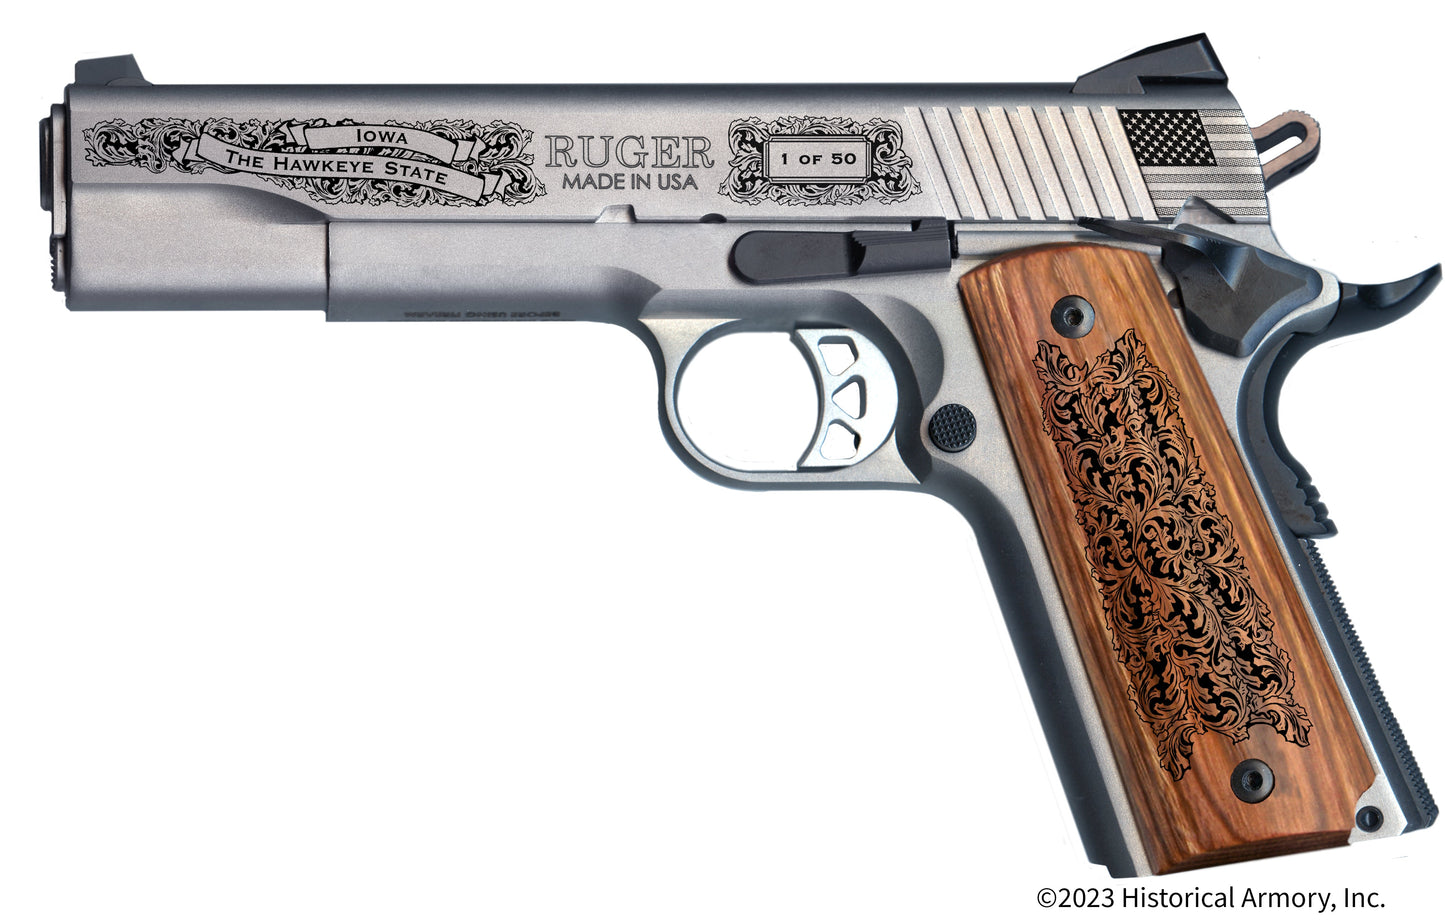 Cherokee County Iowa Engraved .45 Auto Ruger 1911